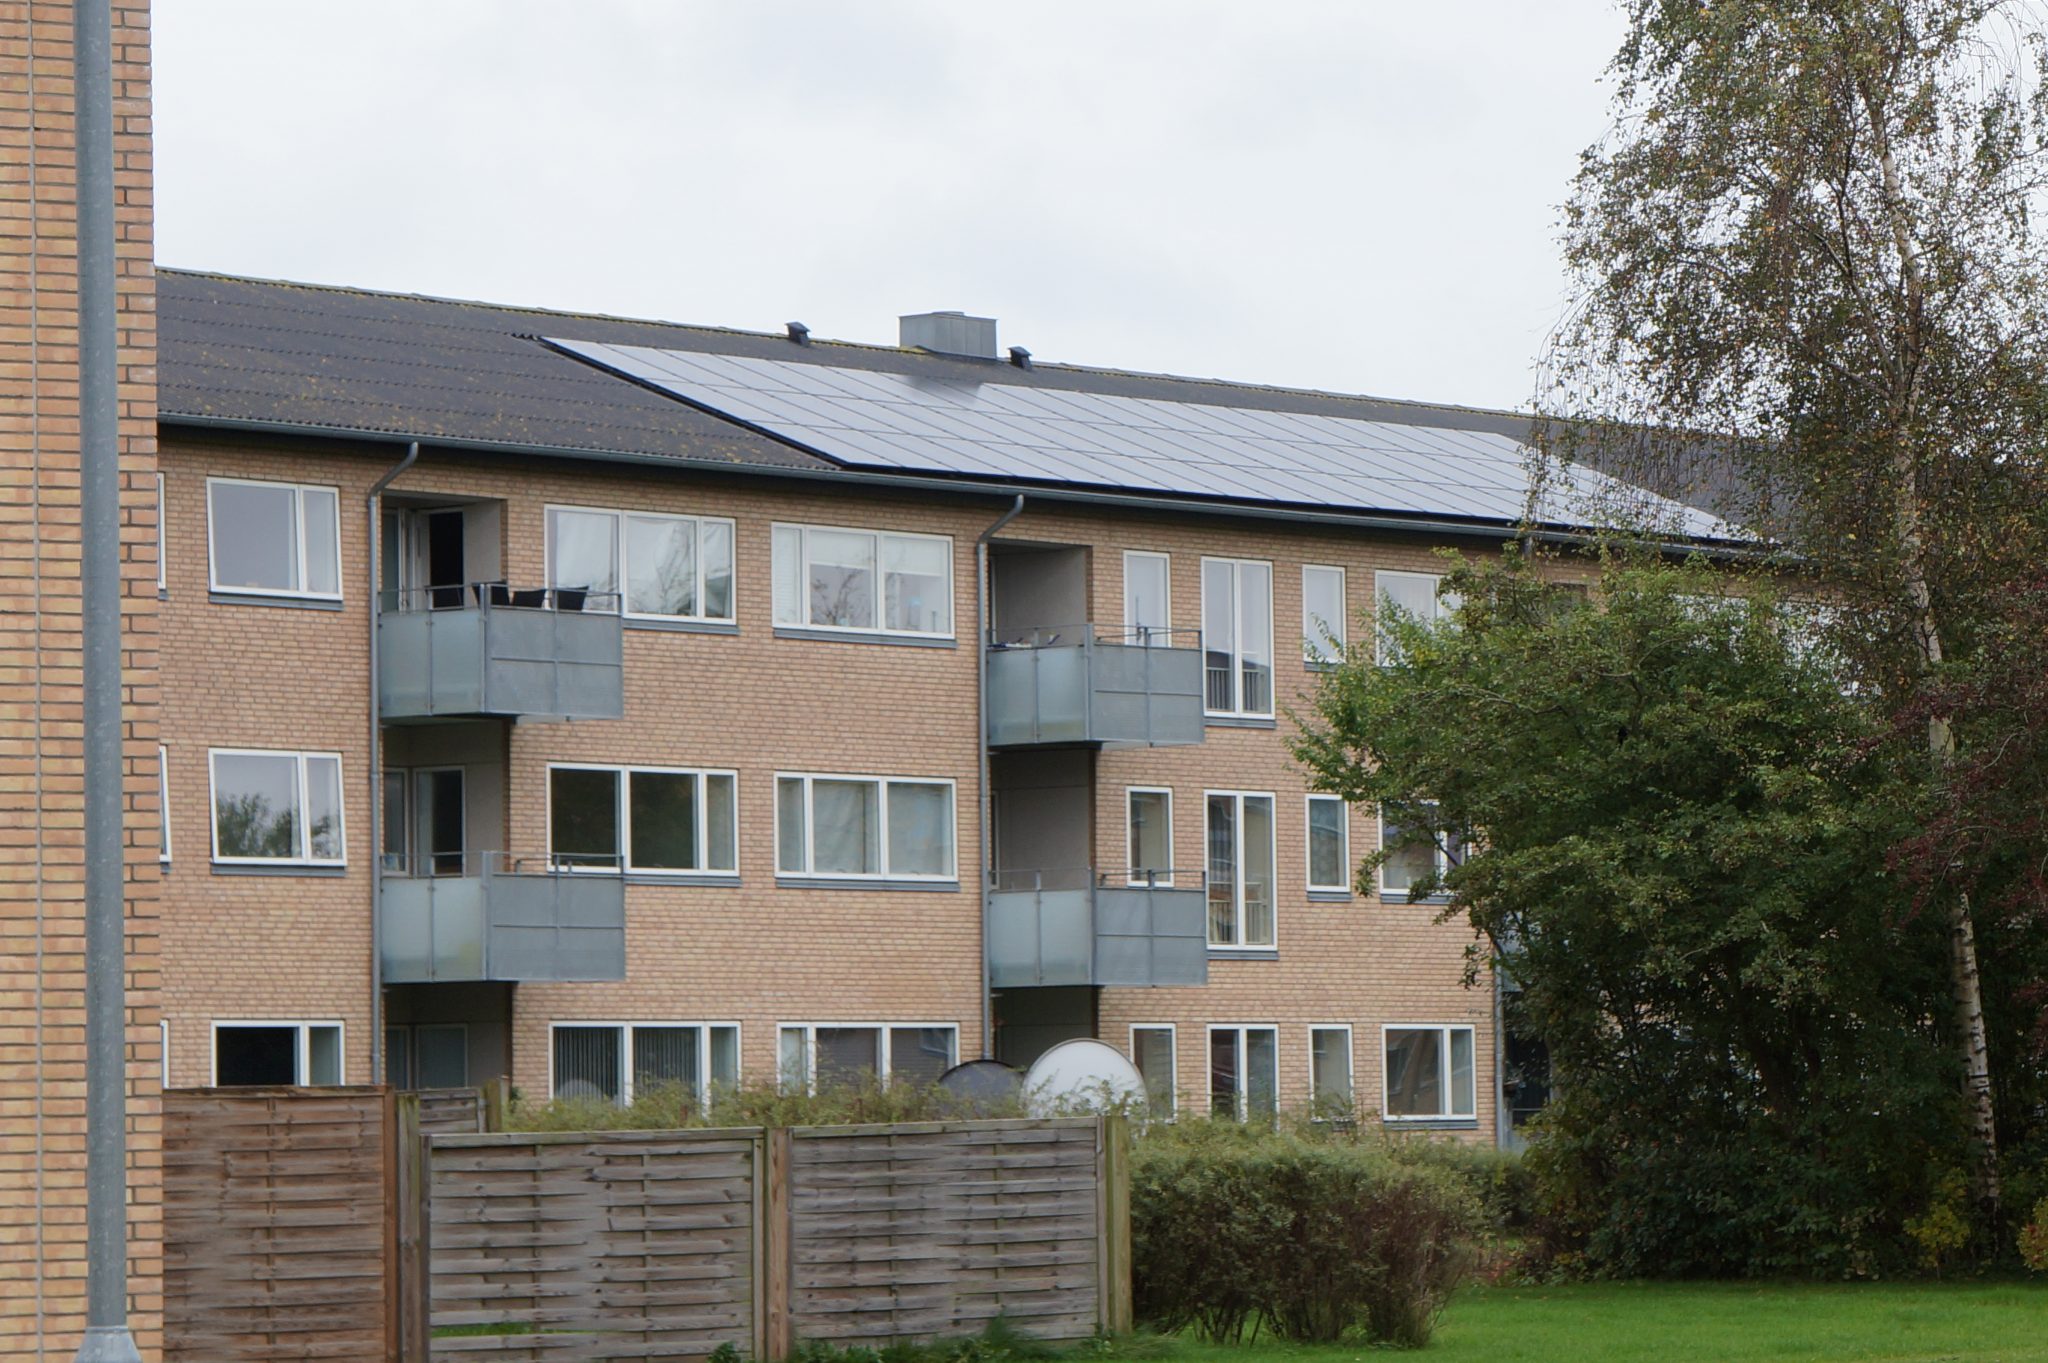 Three storey demo building with integrated solar PV panels towards East. Photo: DEM Danish Energy Management